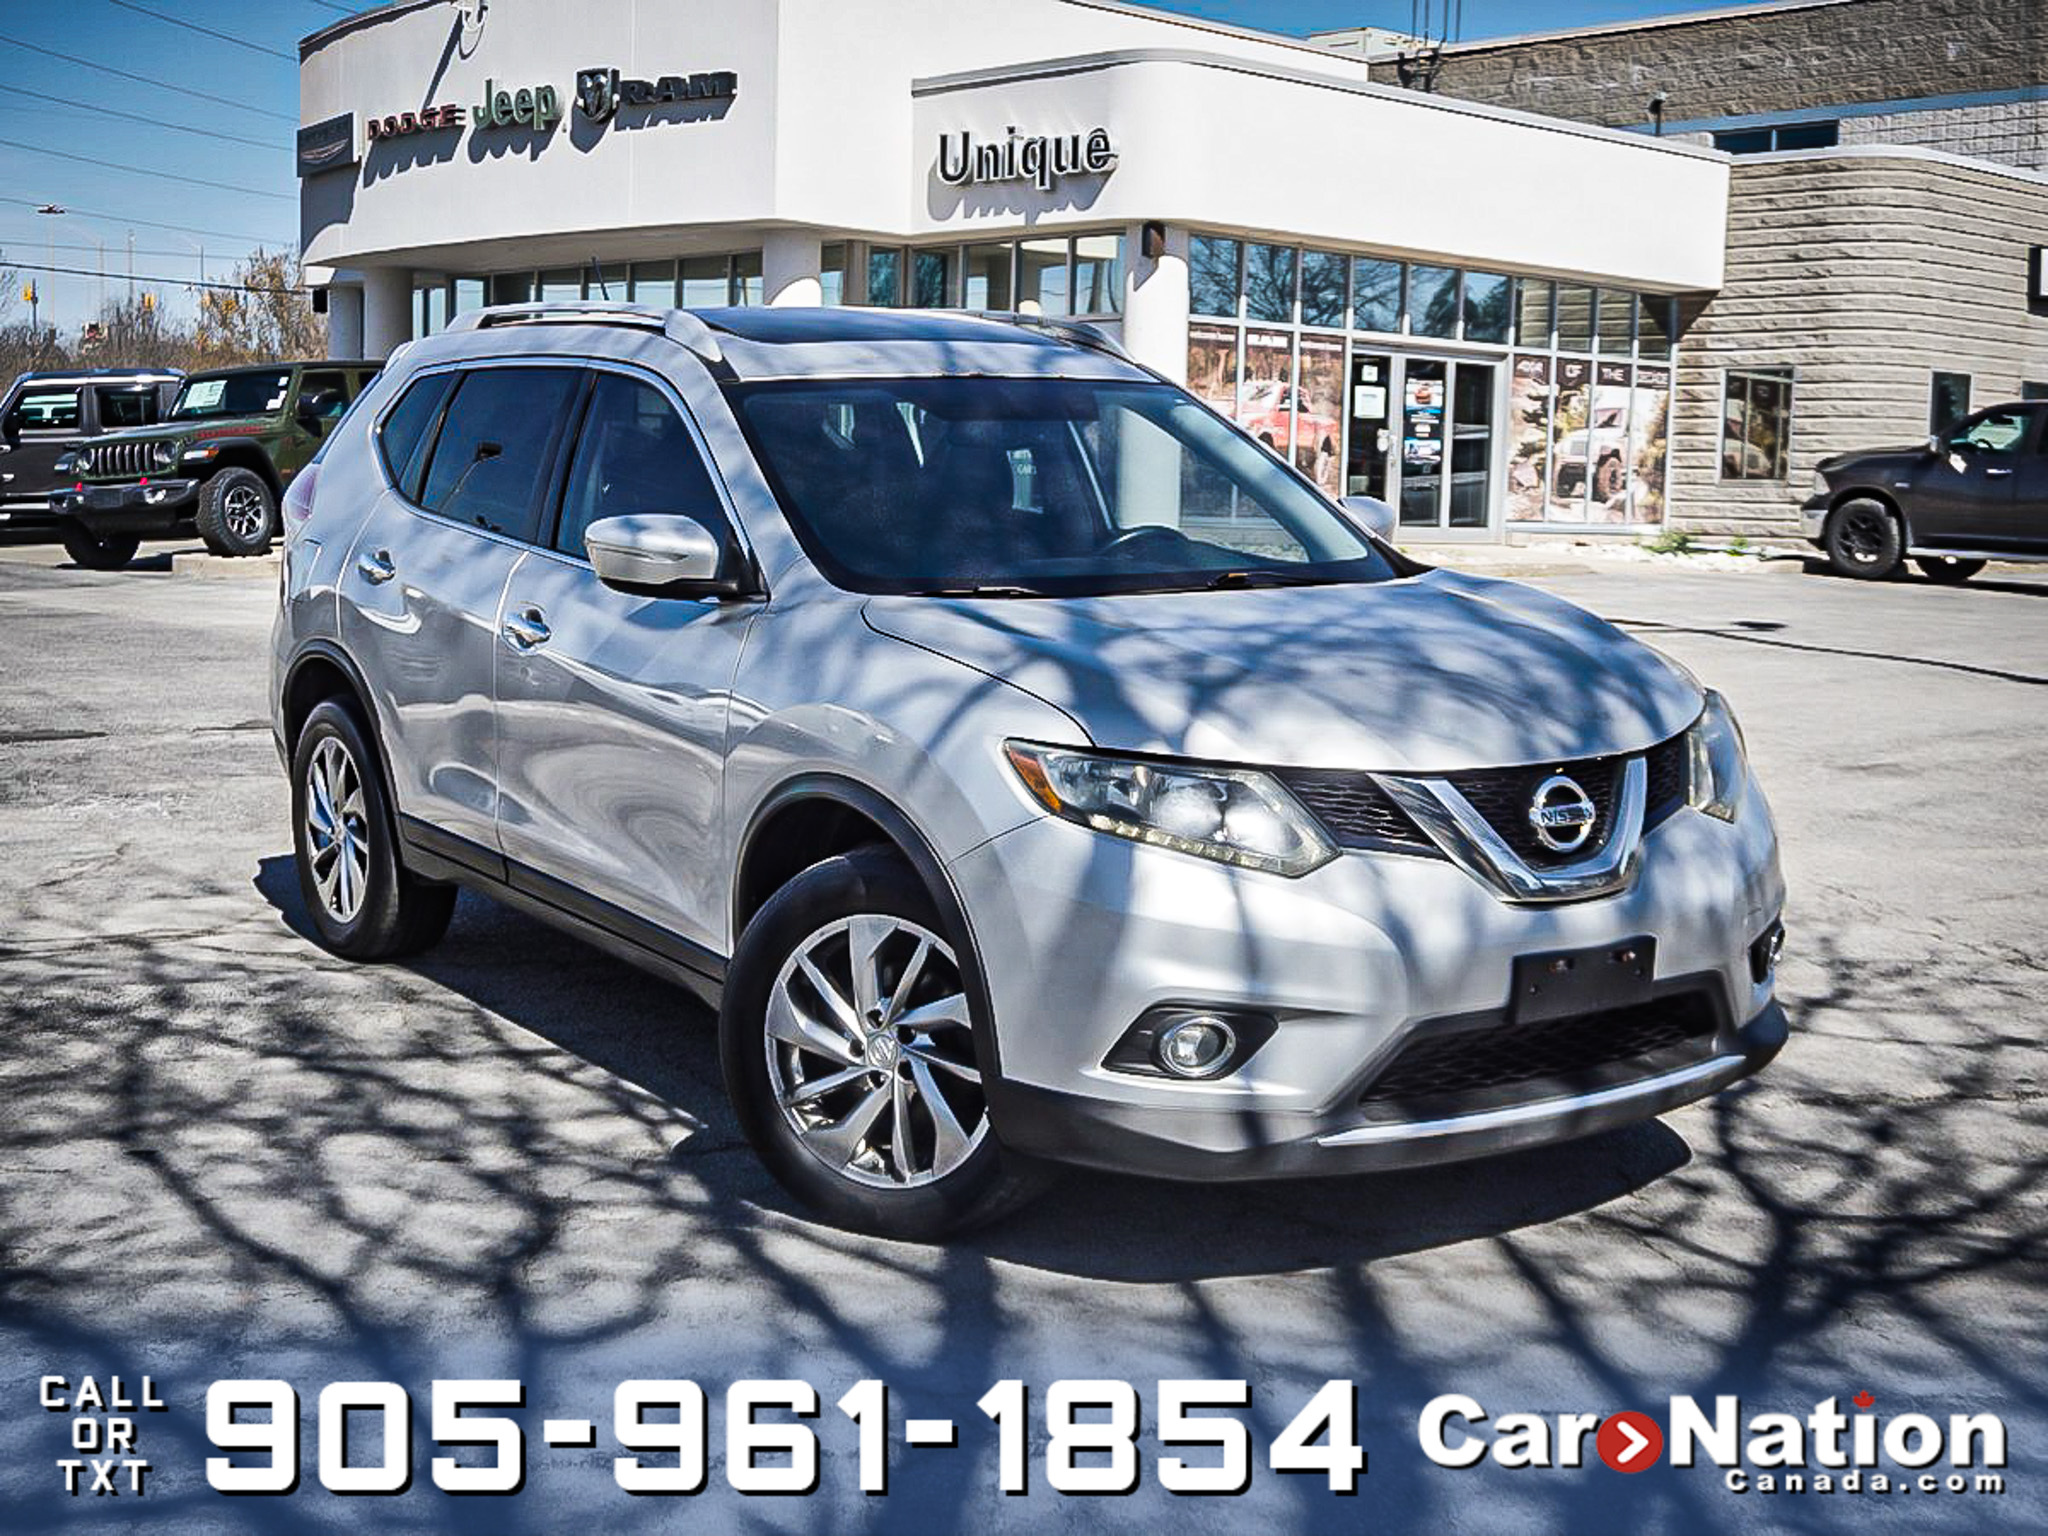 2014 Nissan Rogue SL AWD| AS-TRADED| LEATHER| PANO ROOF|